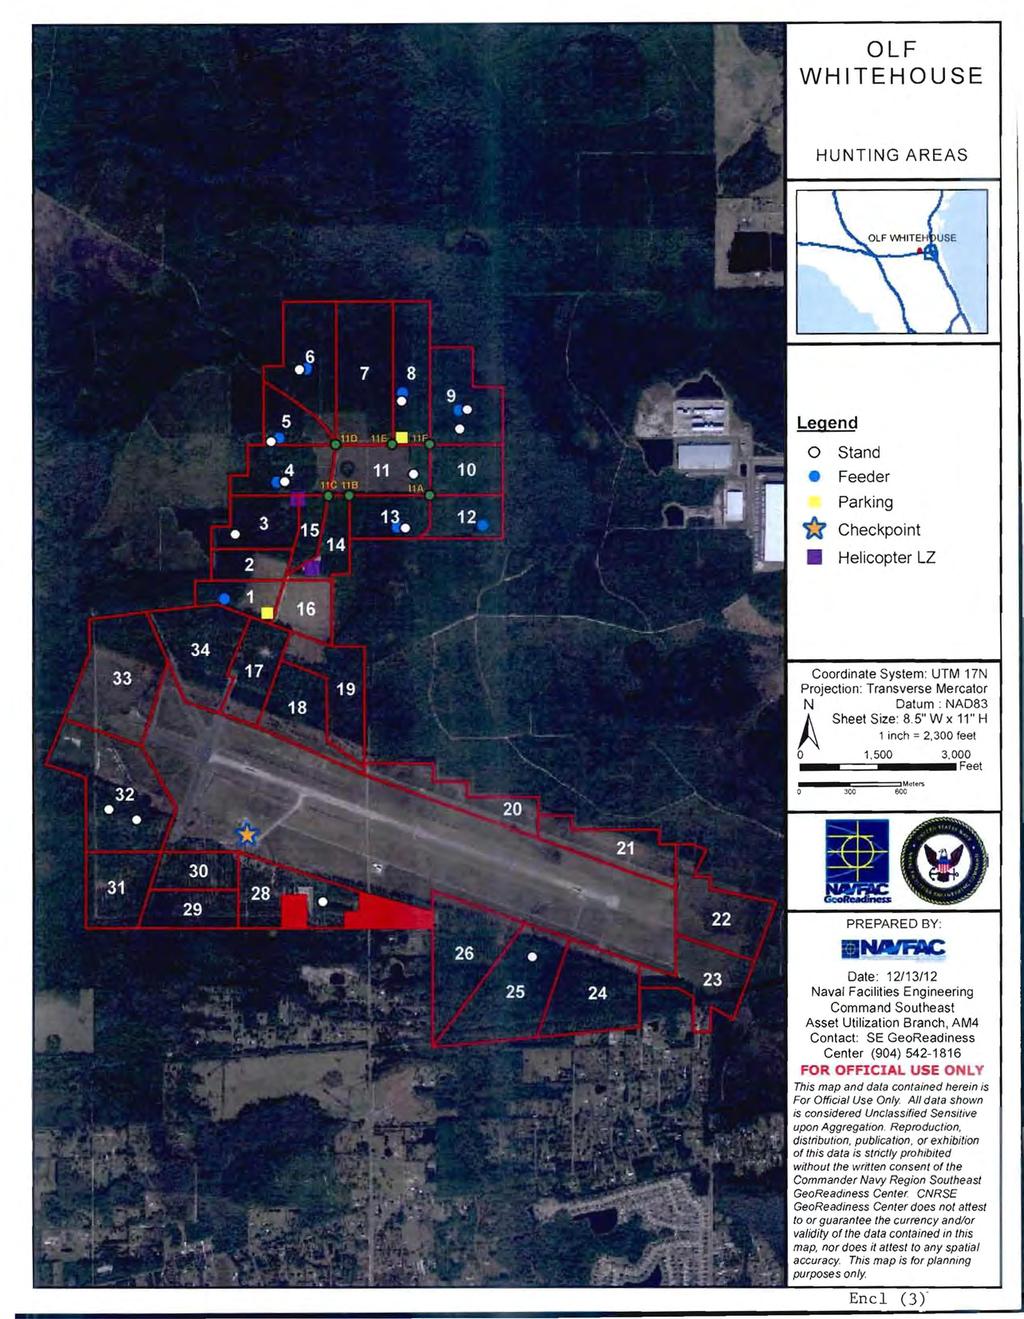 OLF WHITEHOUSE HUNTING AREAS 0 Stand Feeder Parking t:r Checkpoint Helicopter LZ Coordinate System: UTM 17N Projection: Transverse Mercator N Datum : NAD83 J... Sheet Size: 8.5" W x 11" H!